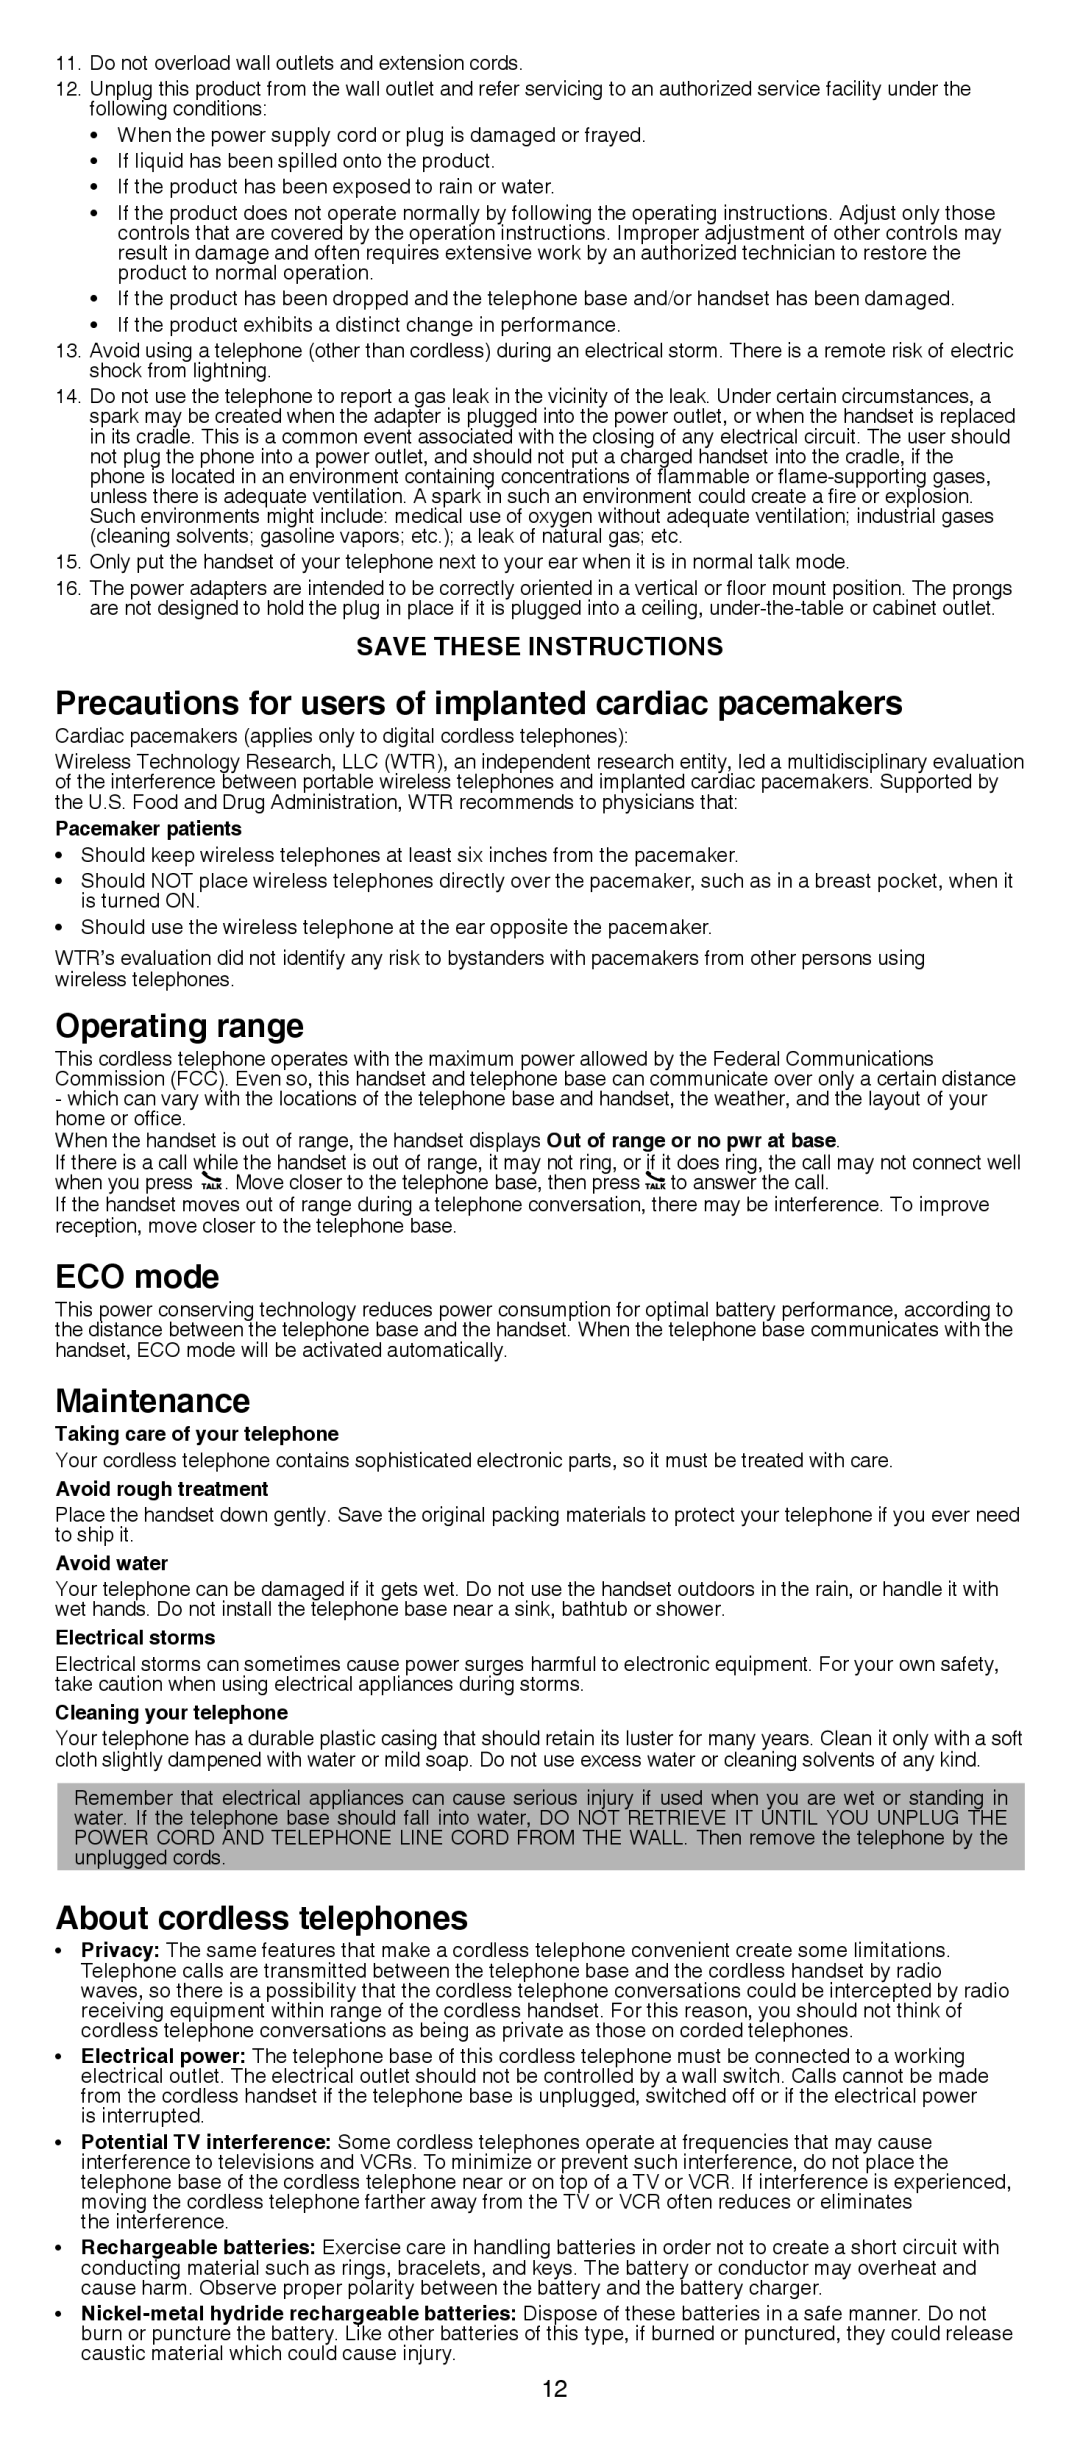 VTech CS6629/CS6629-2/CS6629-3 user manual Precautions for users of implanted cardiac pacemakers, Operating range, ECO mode 